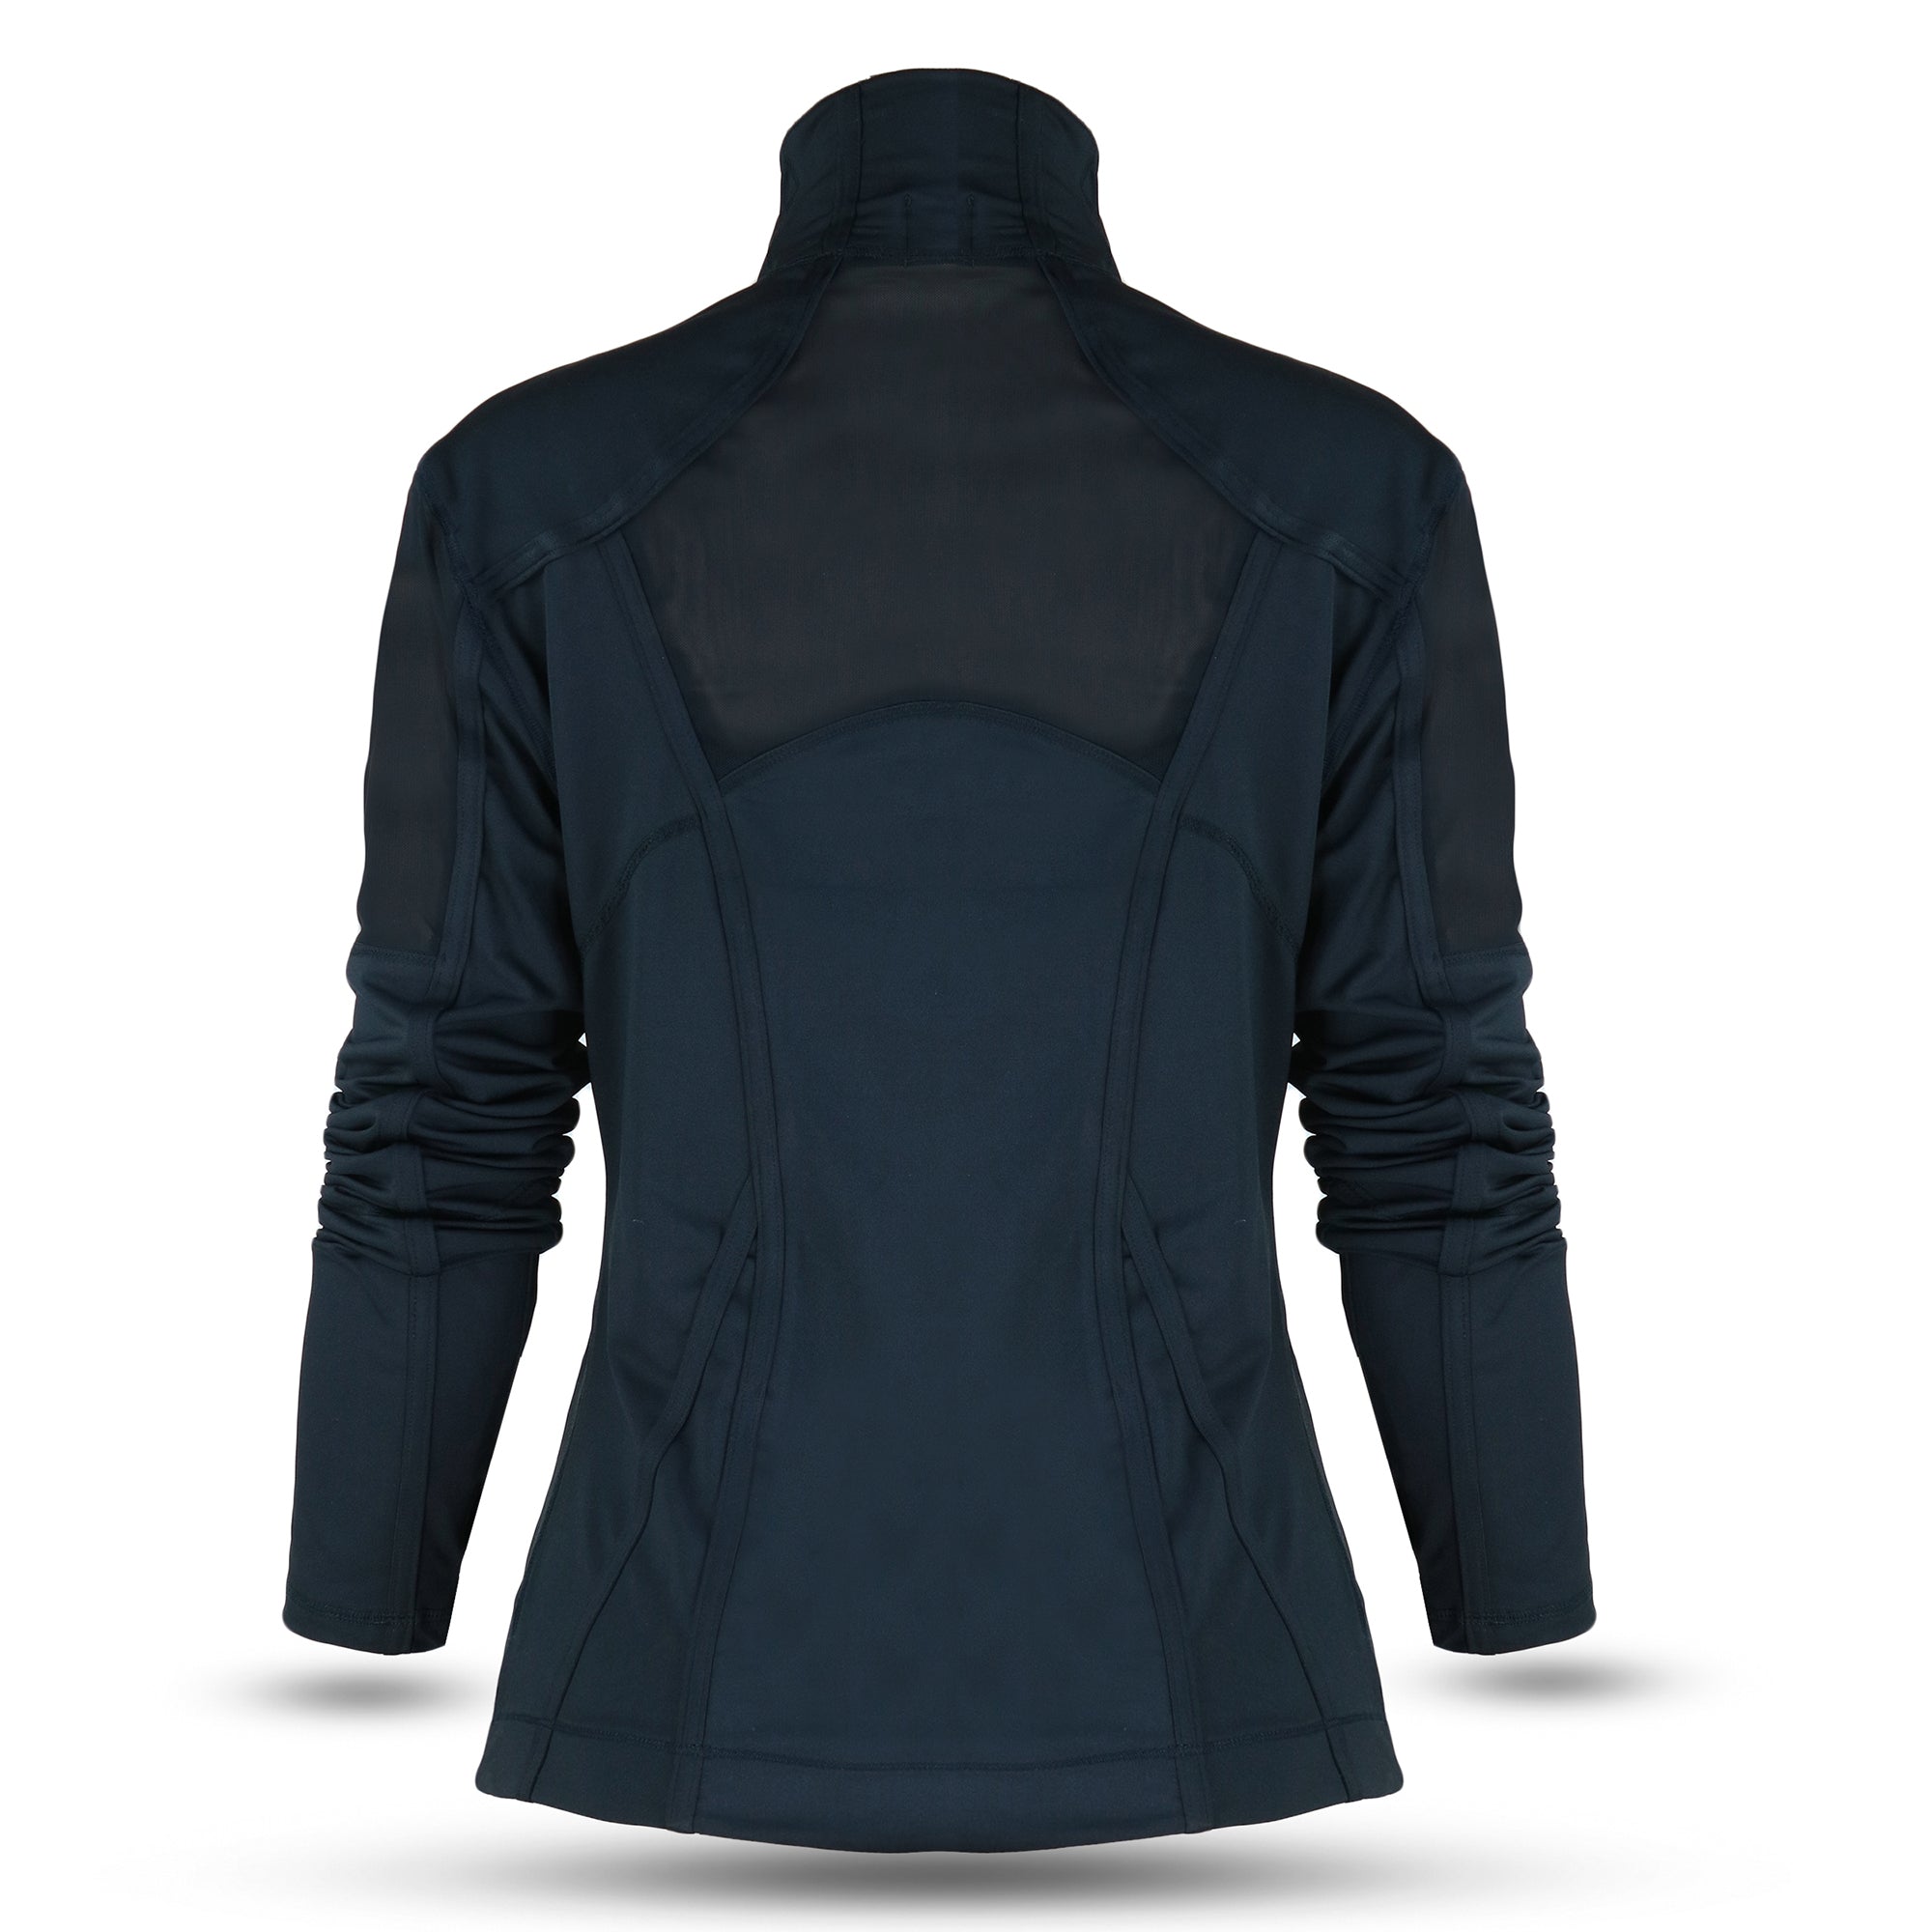 ***ELITE COLLECTION** Black Jacket Styled with Mesh Inserts